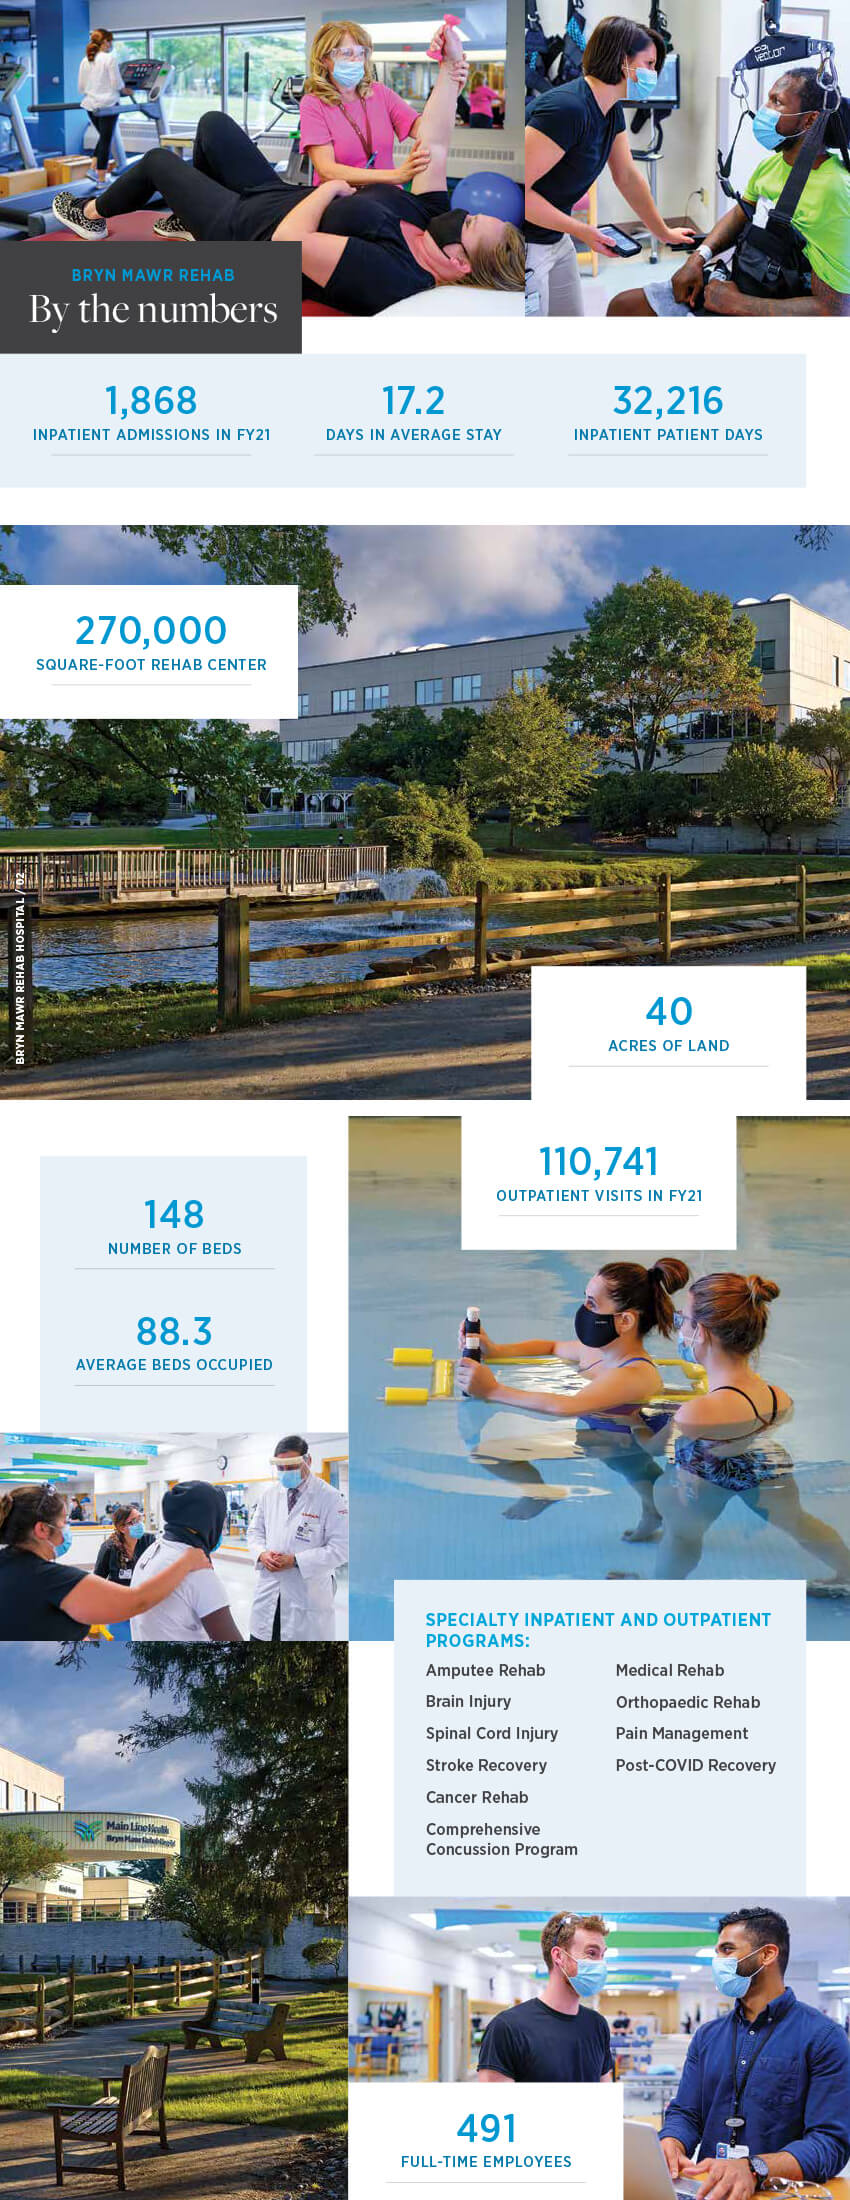 Bryn Mawr Rehab, by the numbers infographic about Rehab Center size